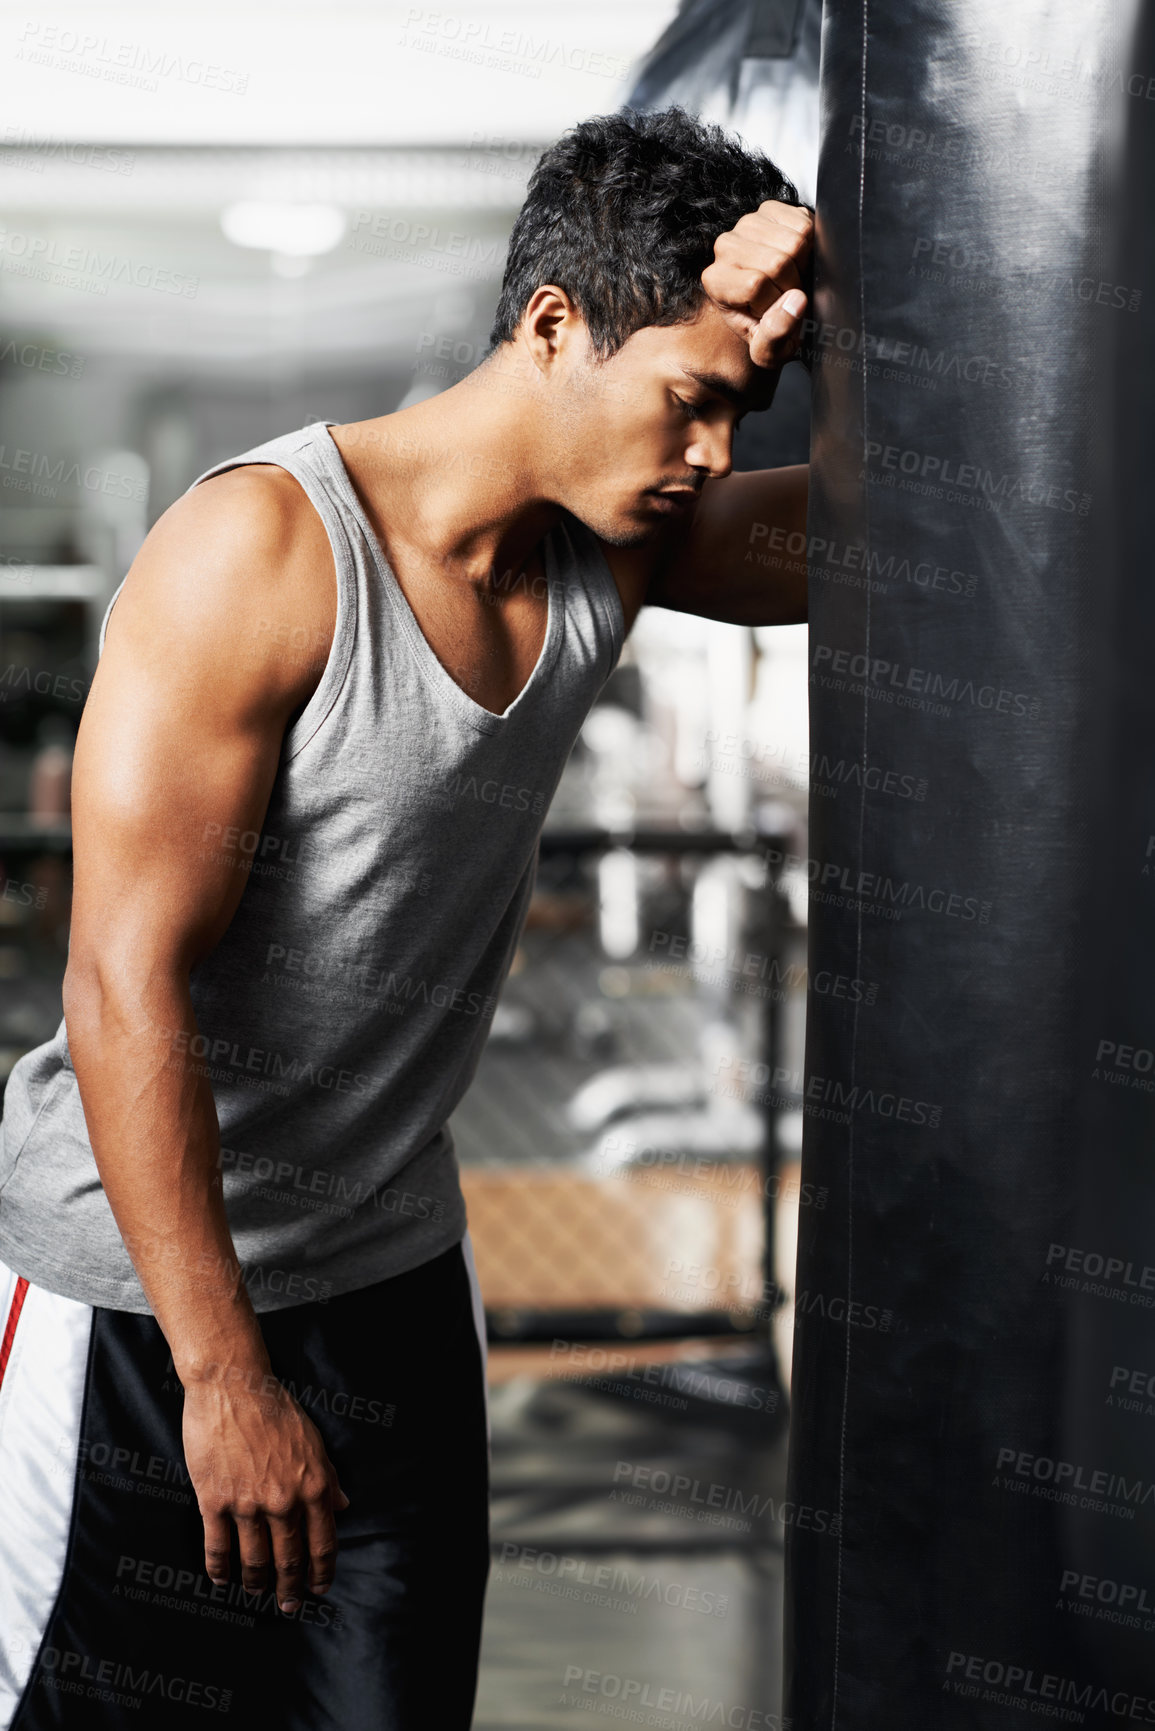 Buy stock photo A muscular young man leaning against a boxing bag and looking defeated